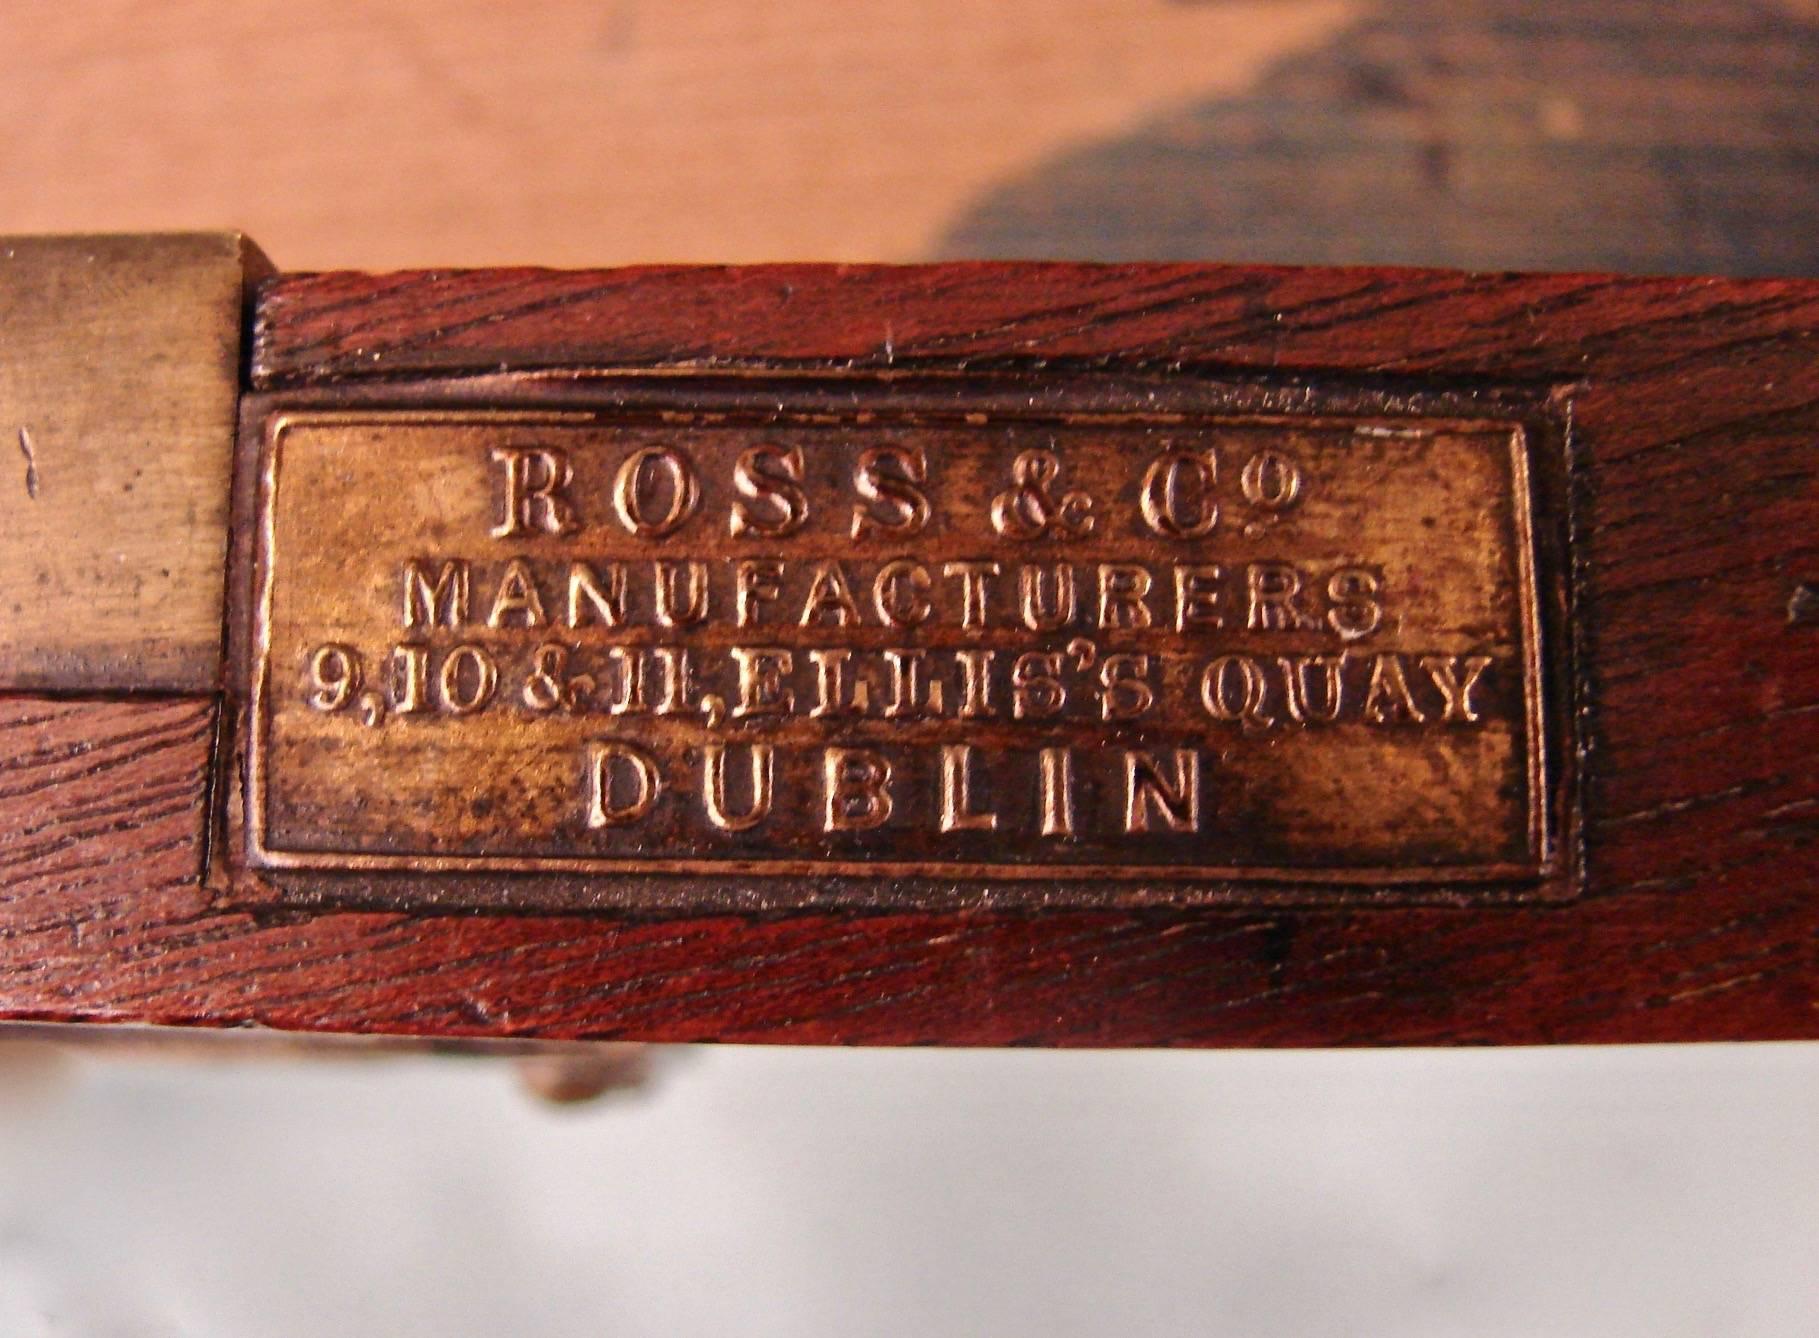 An Irish mahogany seven drawer Campaign chest in two parts, the top with whale's tail brass inlaid corners above four short drawers and one long drawer, the lower case with two long drawers, all resting on turned feet. Made and signed by Ross and